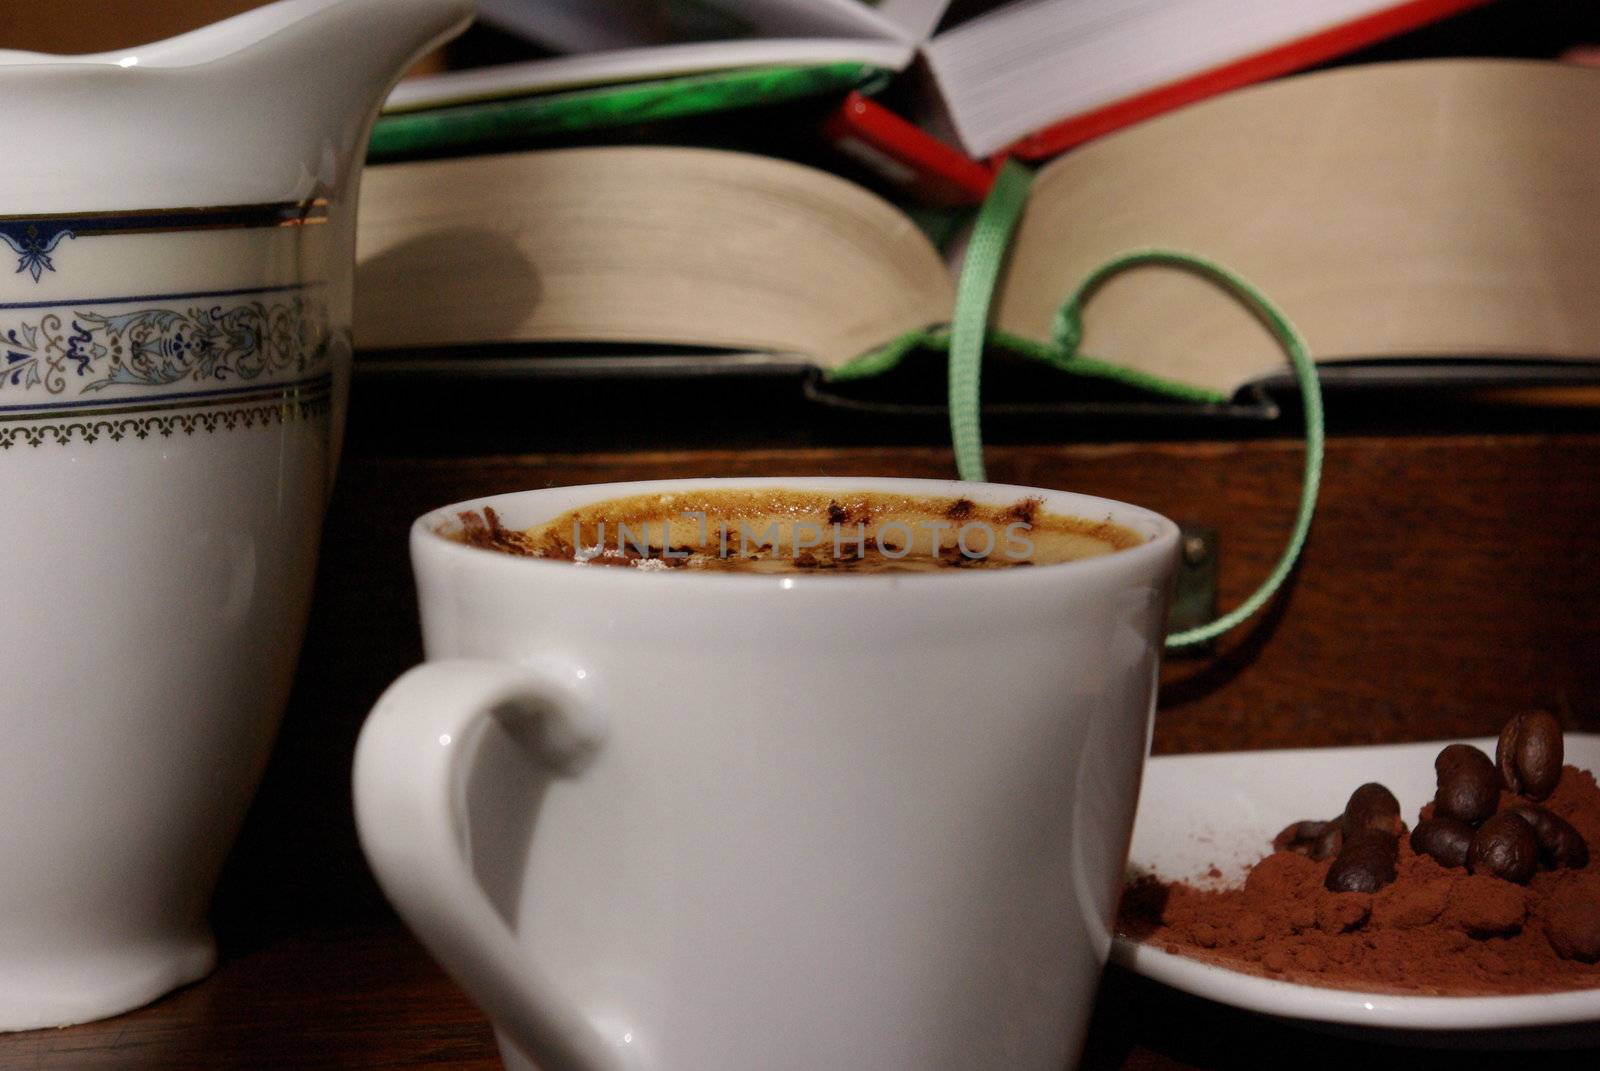 books and a cup of coffee, pentax k10d 